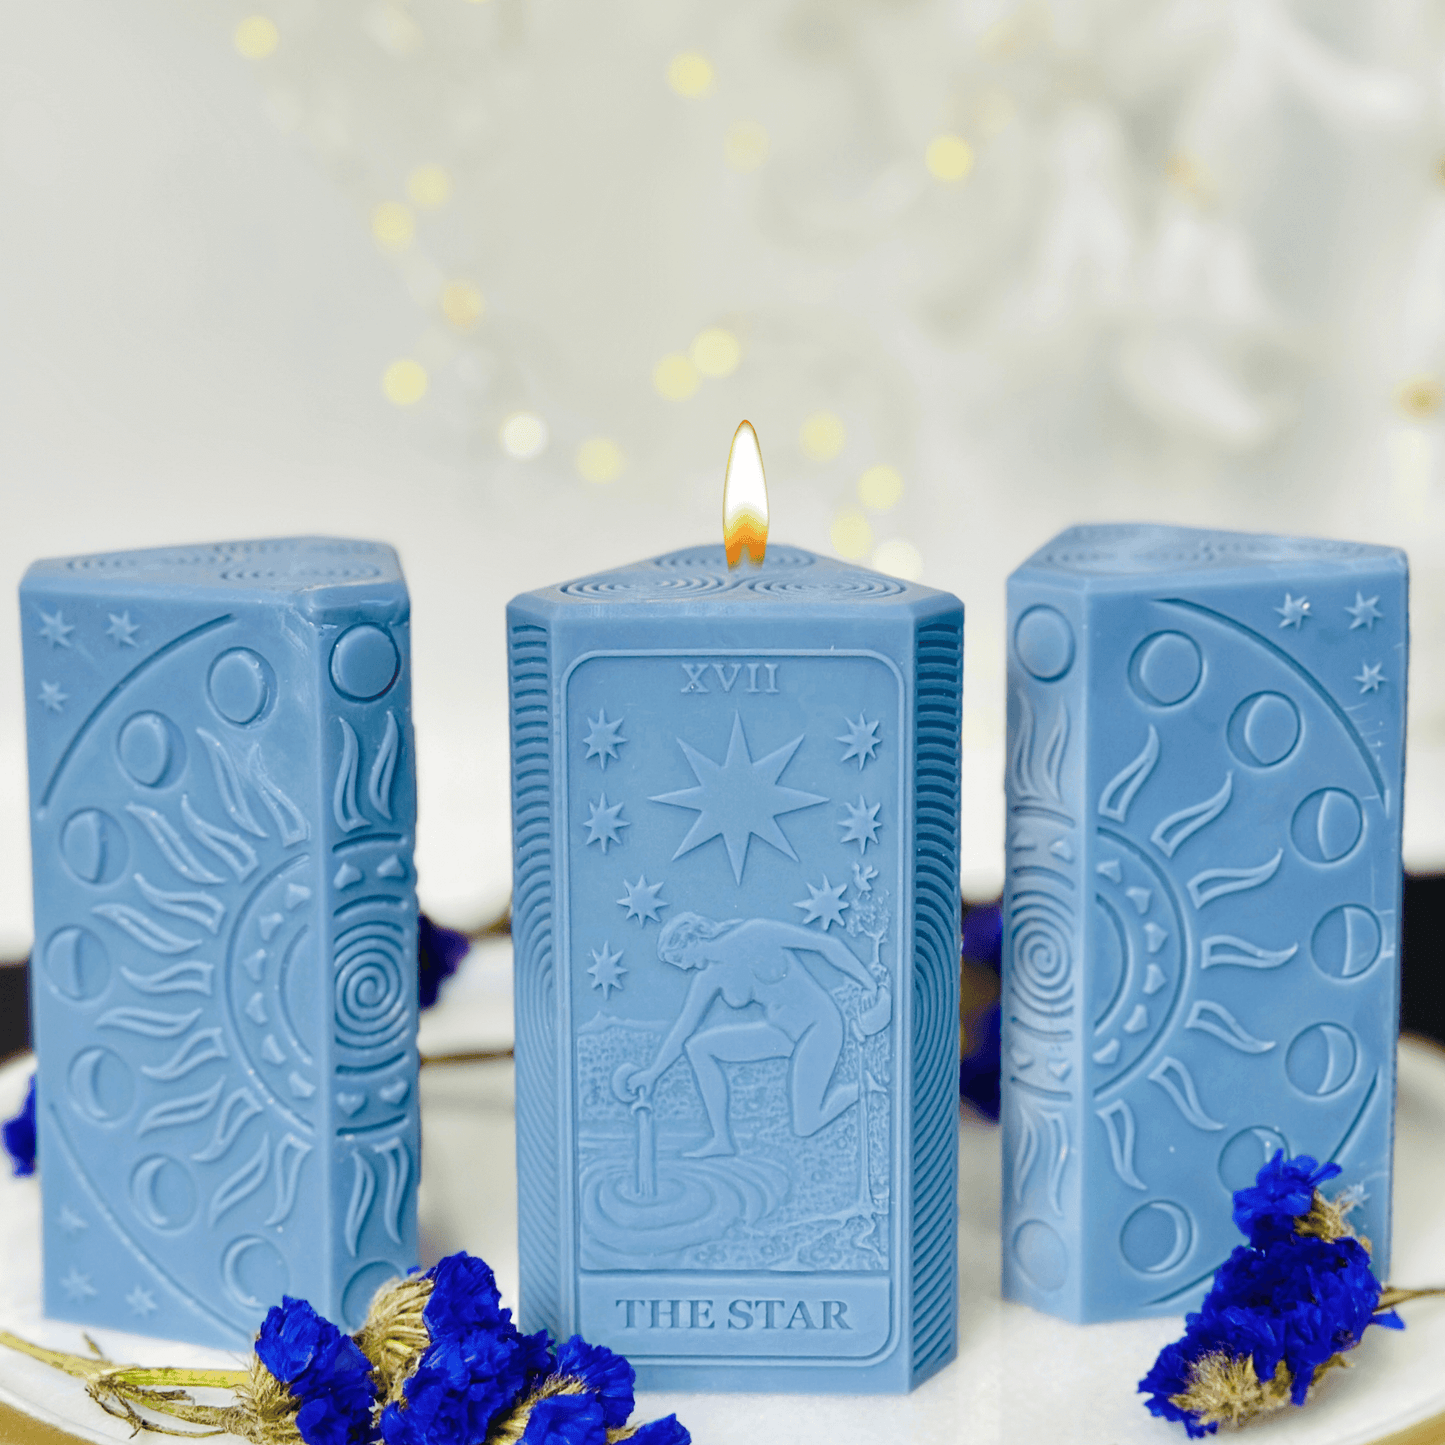 The Star Tarot card and moon phases candle mold,  Silicone candle mold